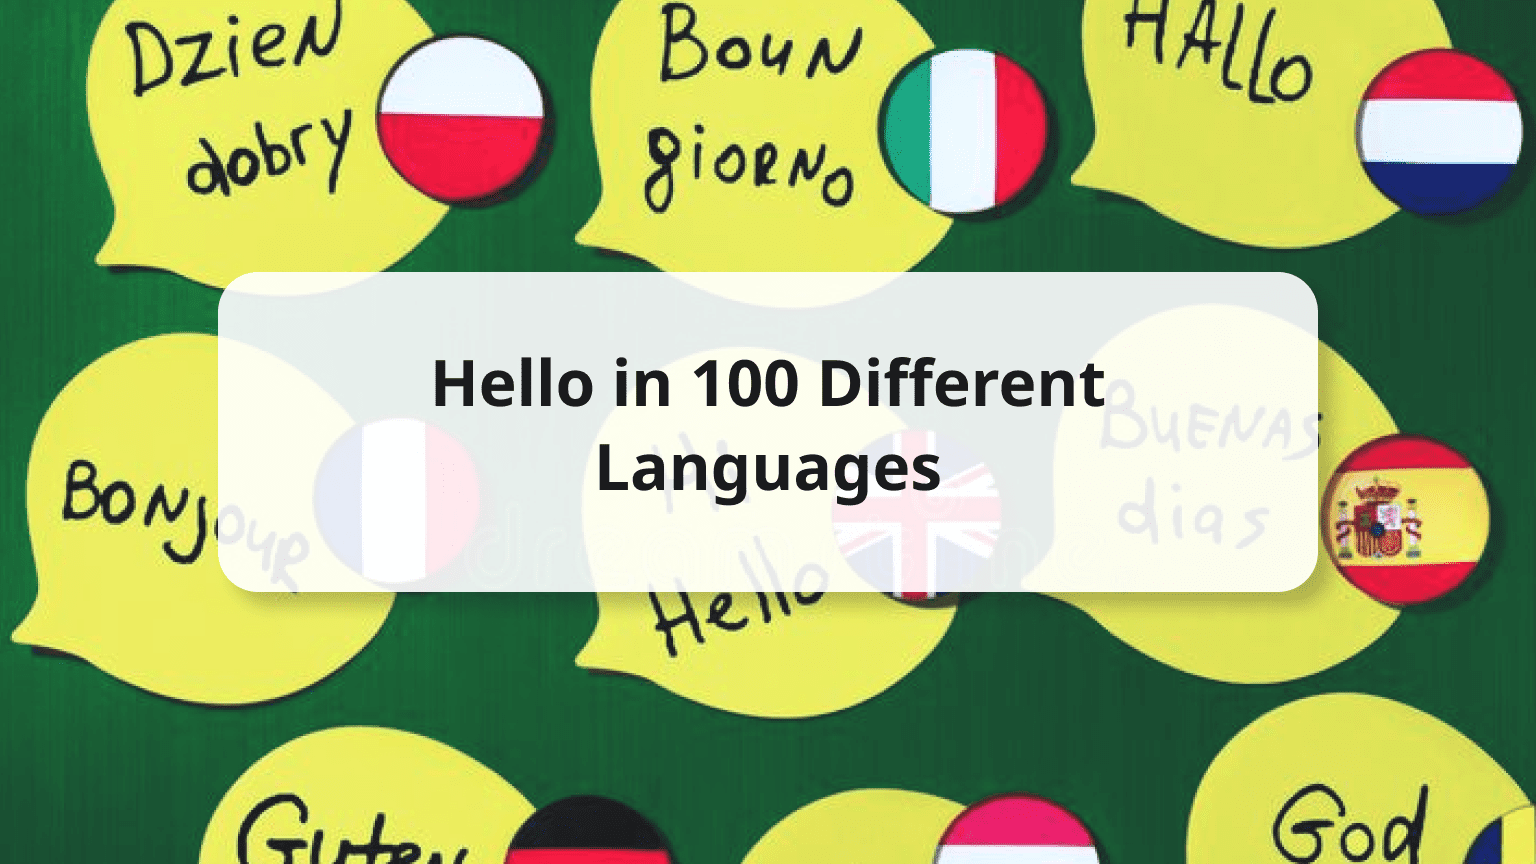 Hello in Spanish: 60 Useful Spanish Greetings for All Occasions